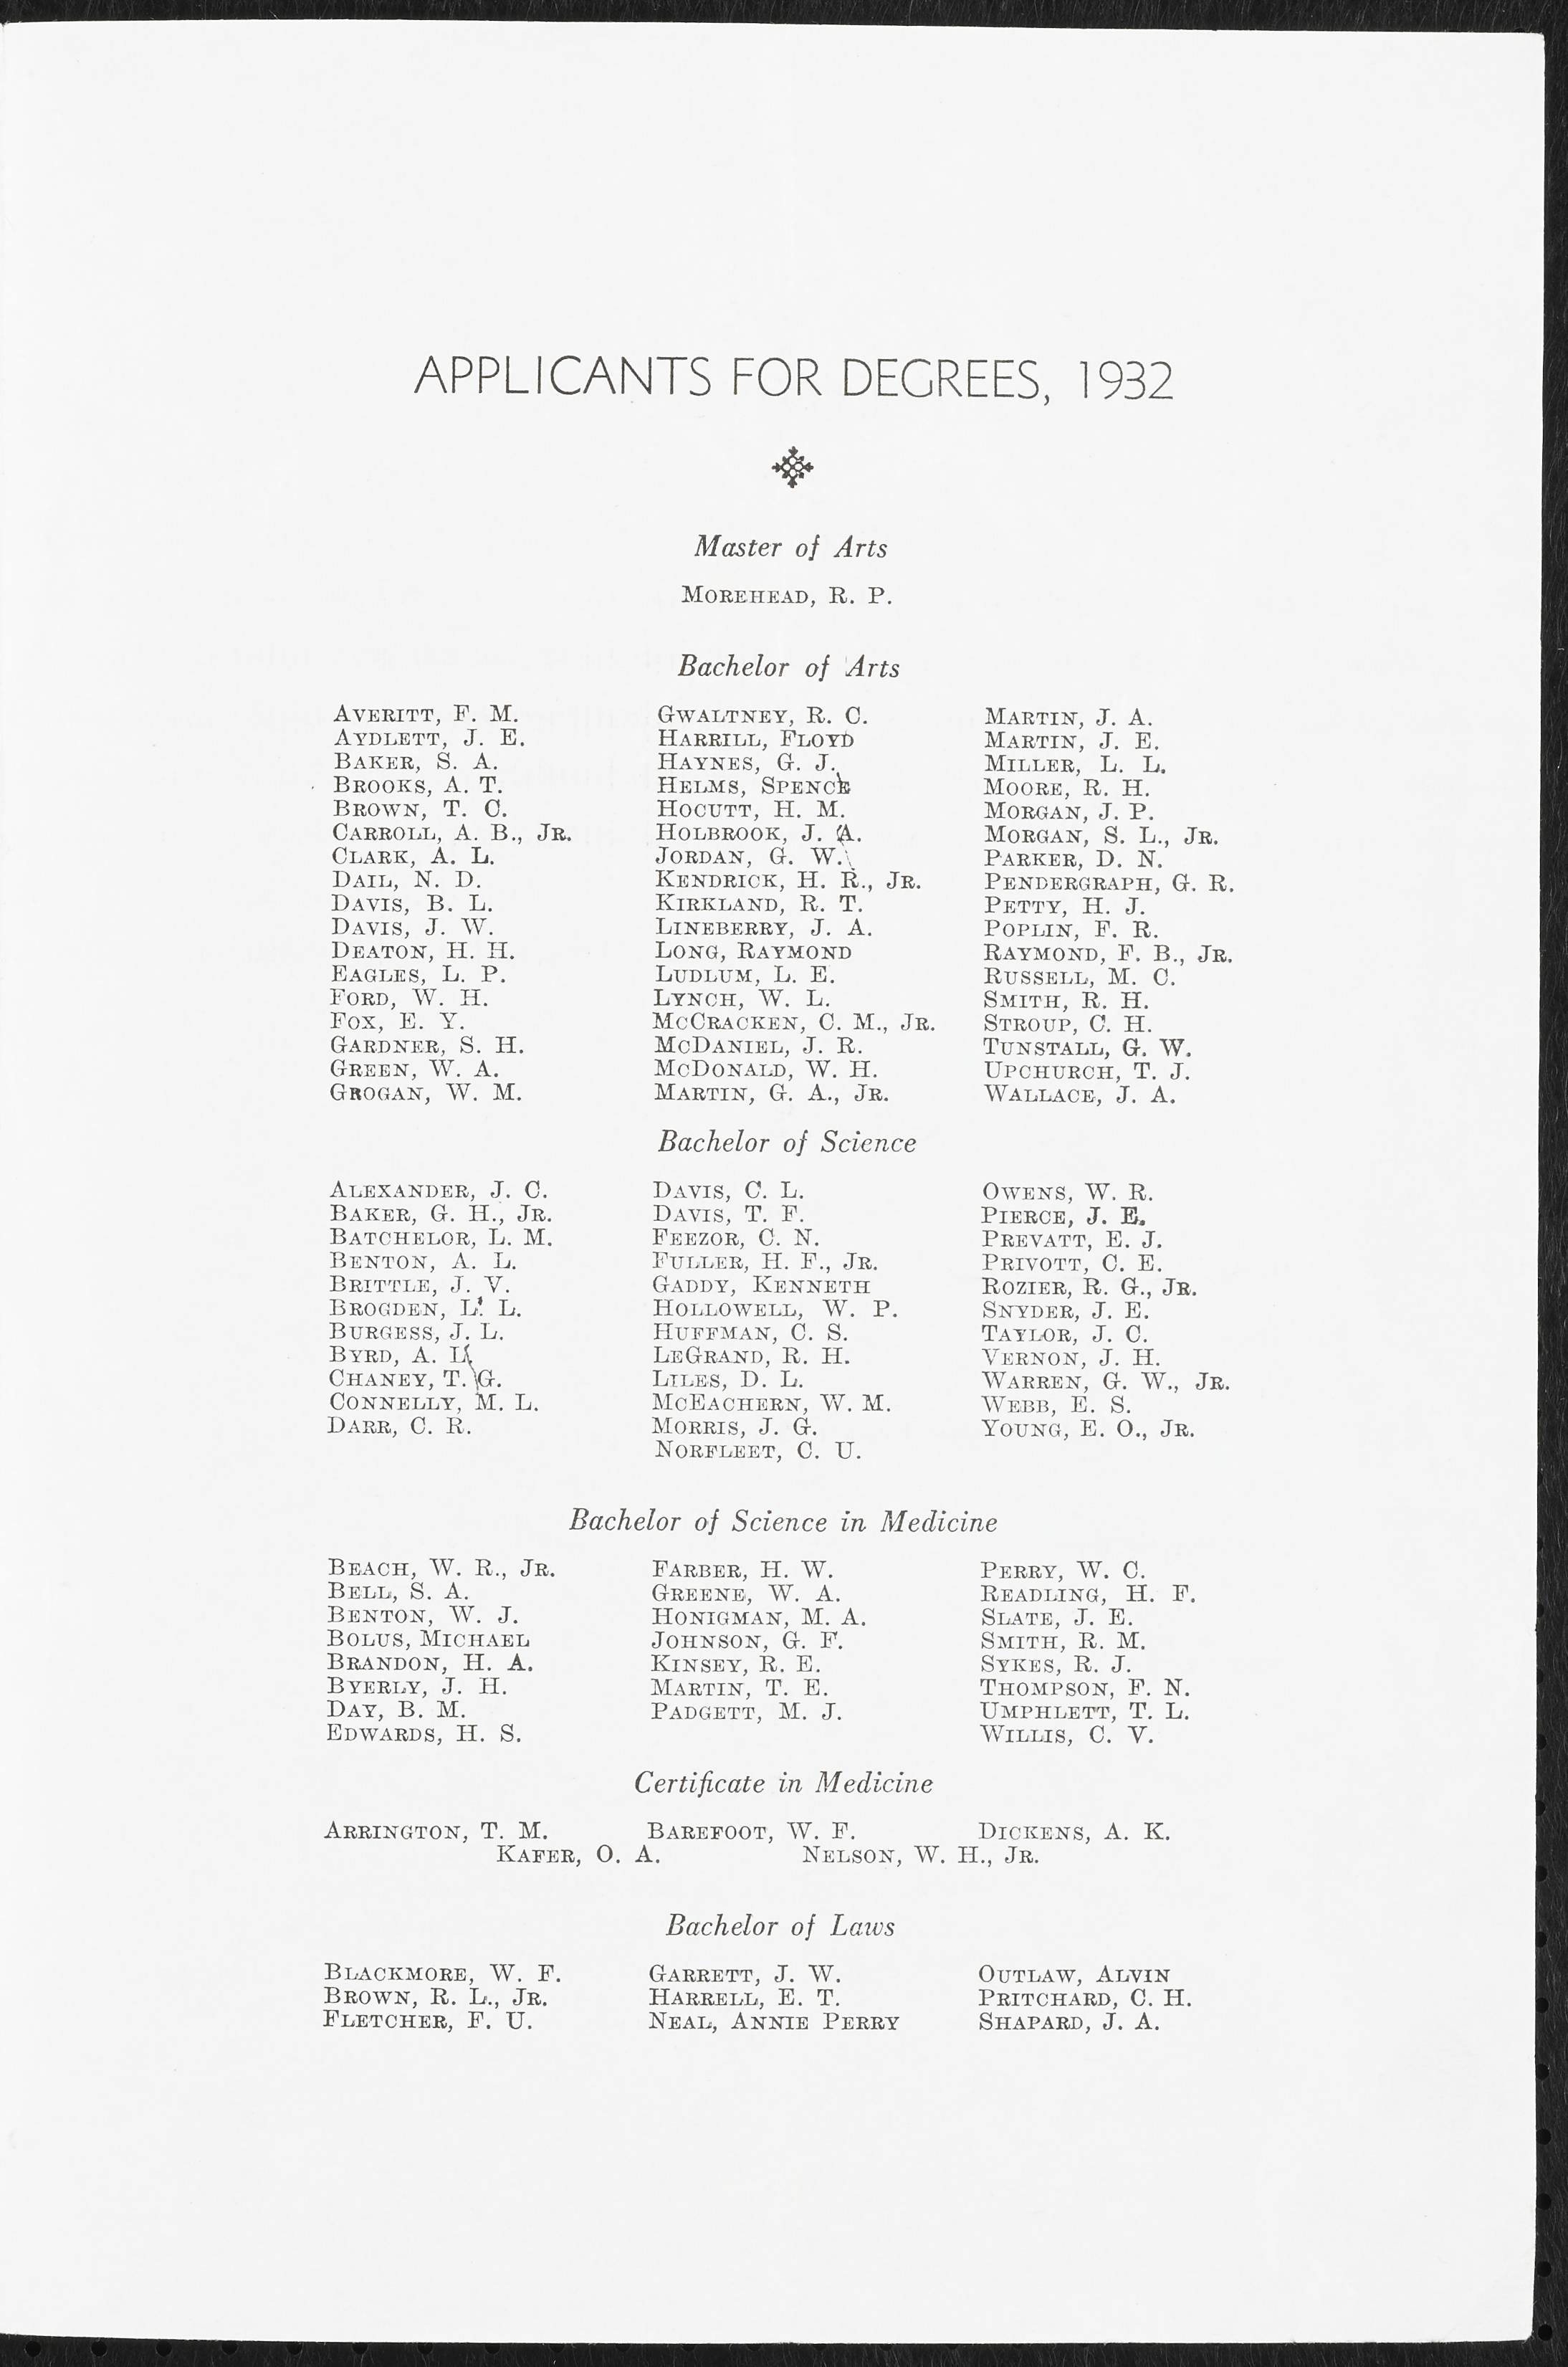 Wake Forest College Commencement Program 1932